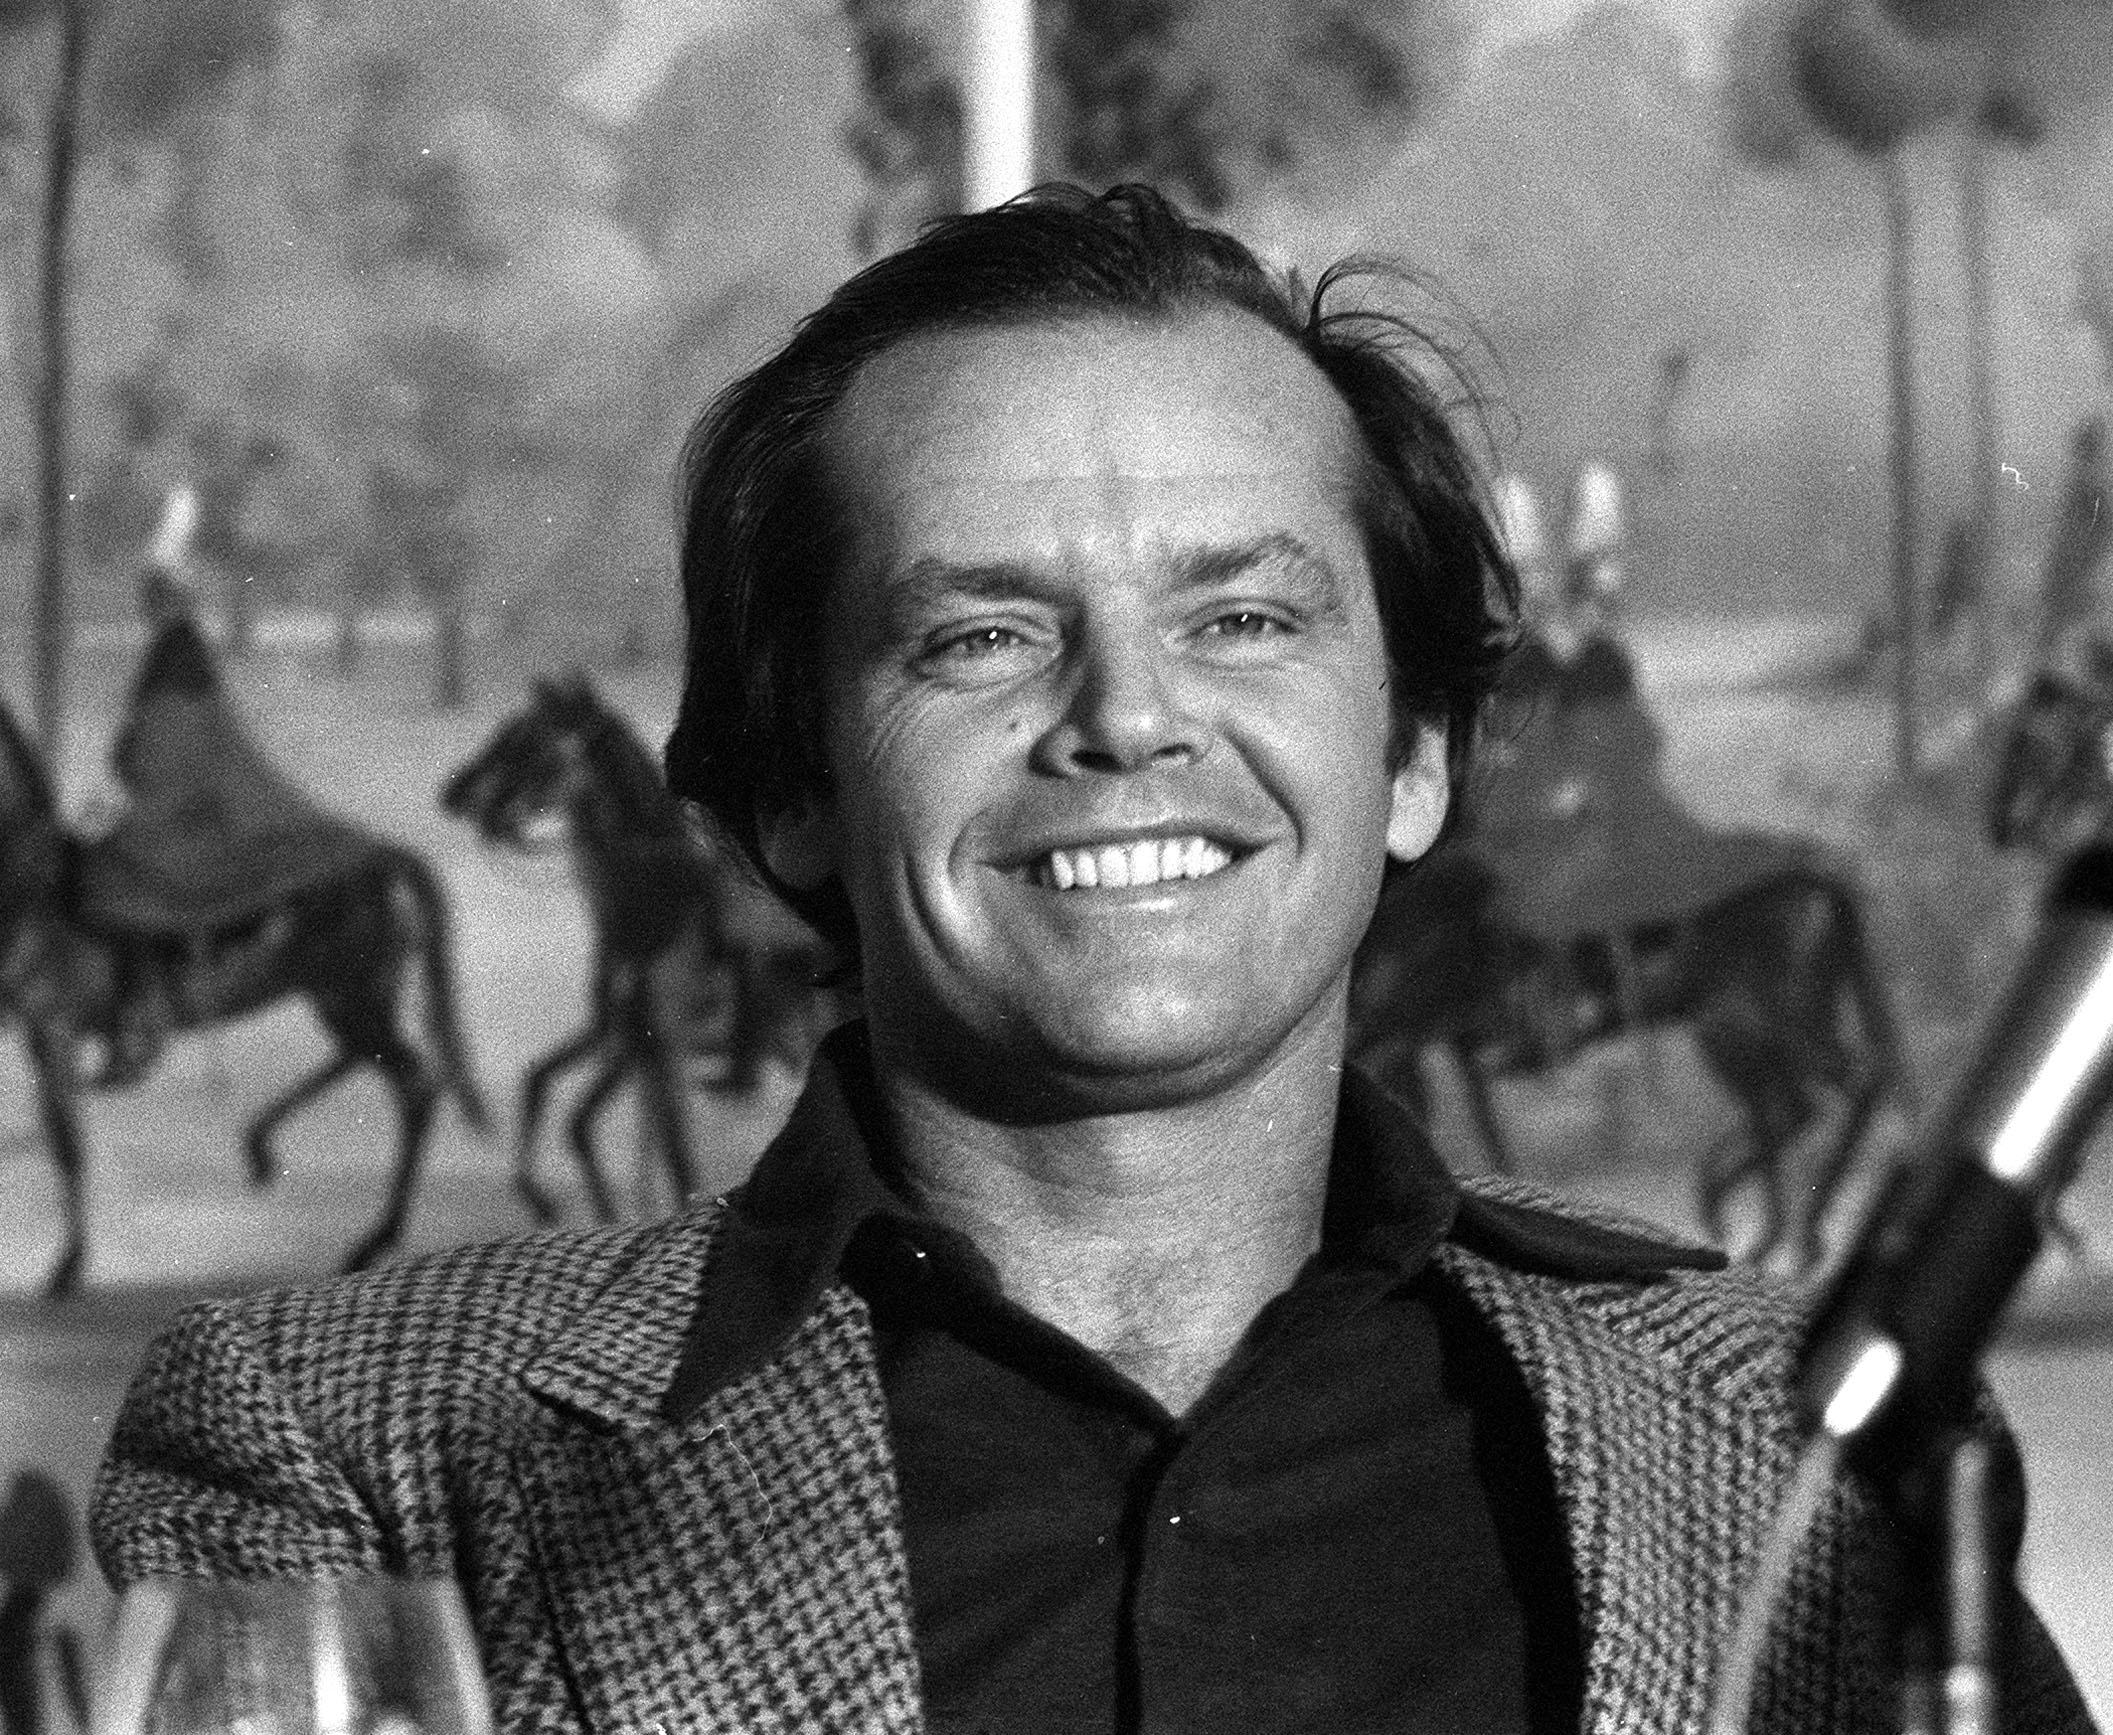 Jack Nicholson, the star of 'The Shining,' wearing a suit